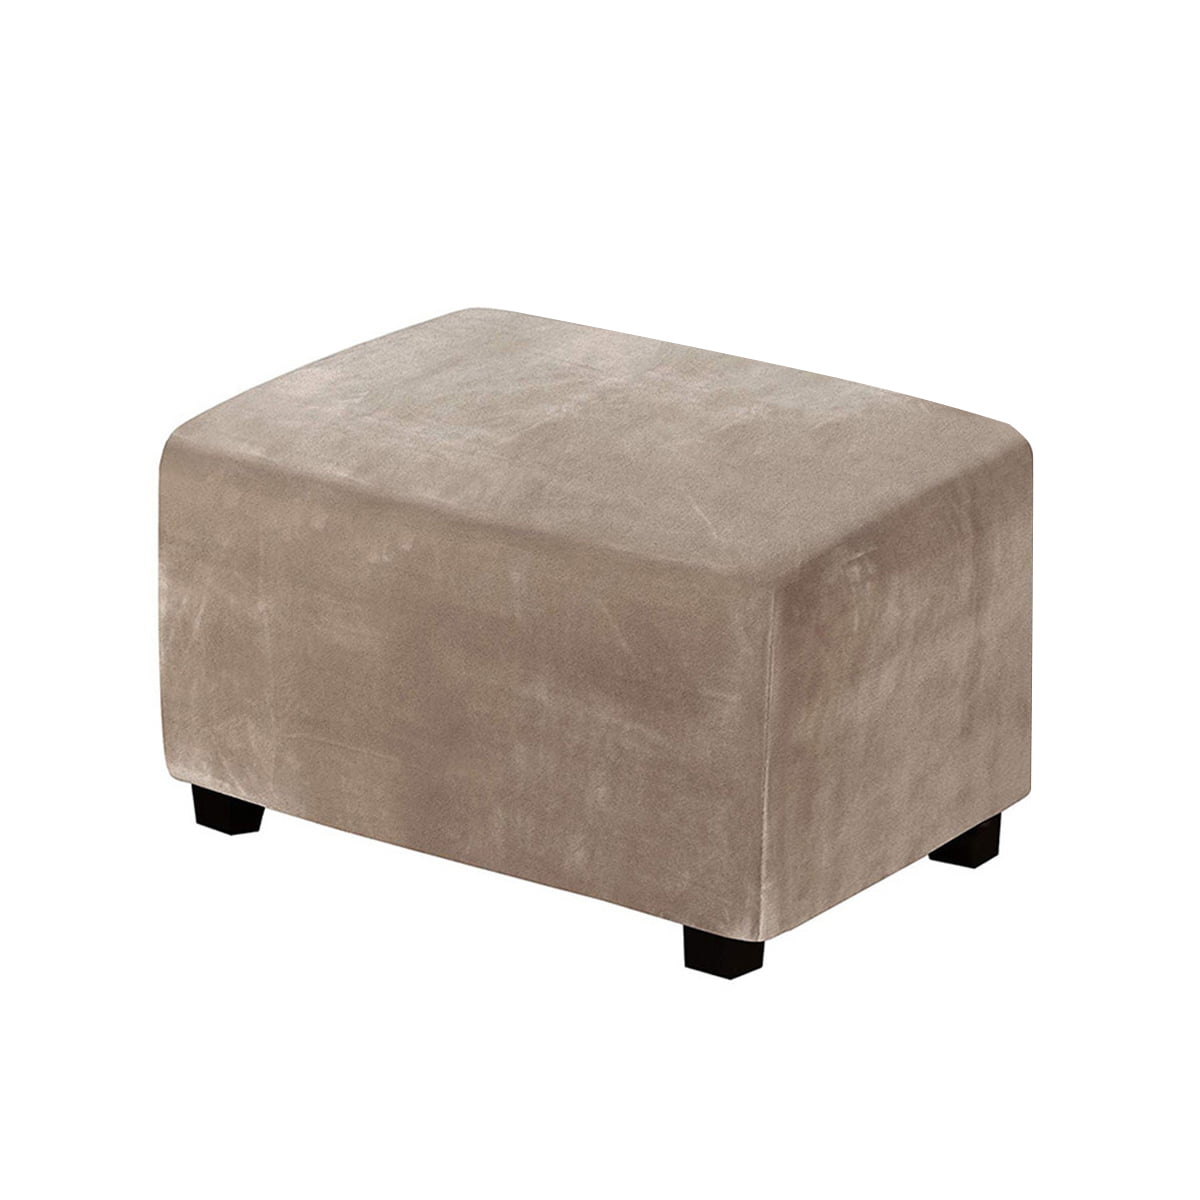 Footstool Sofa Cover Stretch Storage Slipcover Spandex Elastic Footstool Cover 